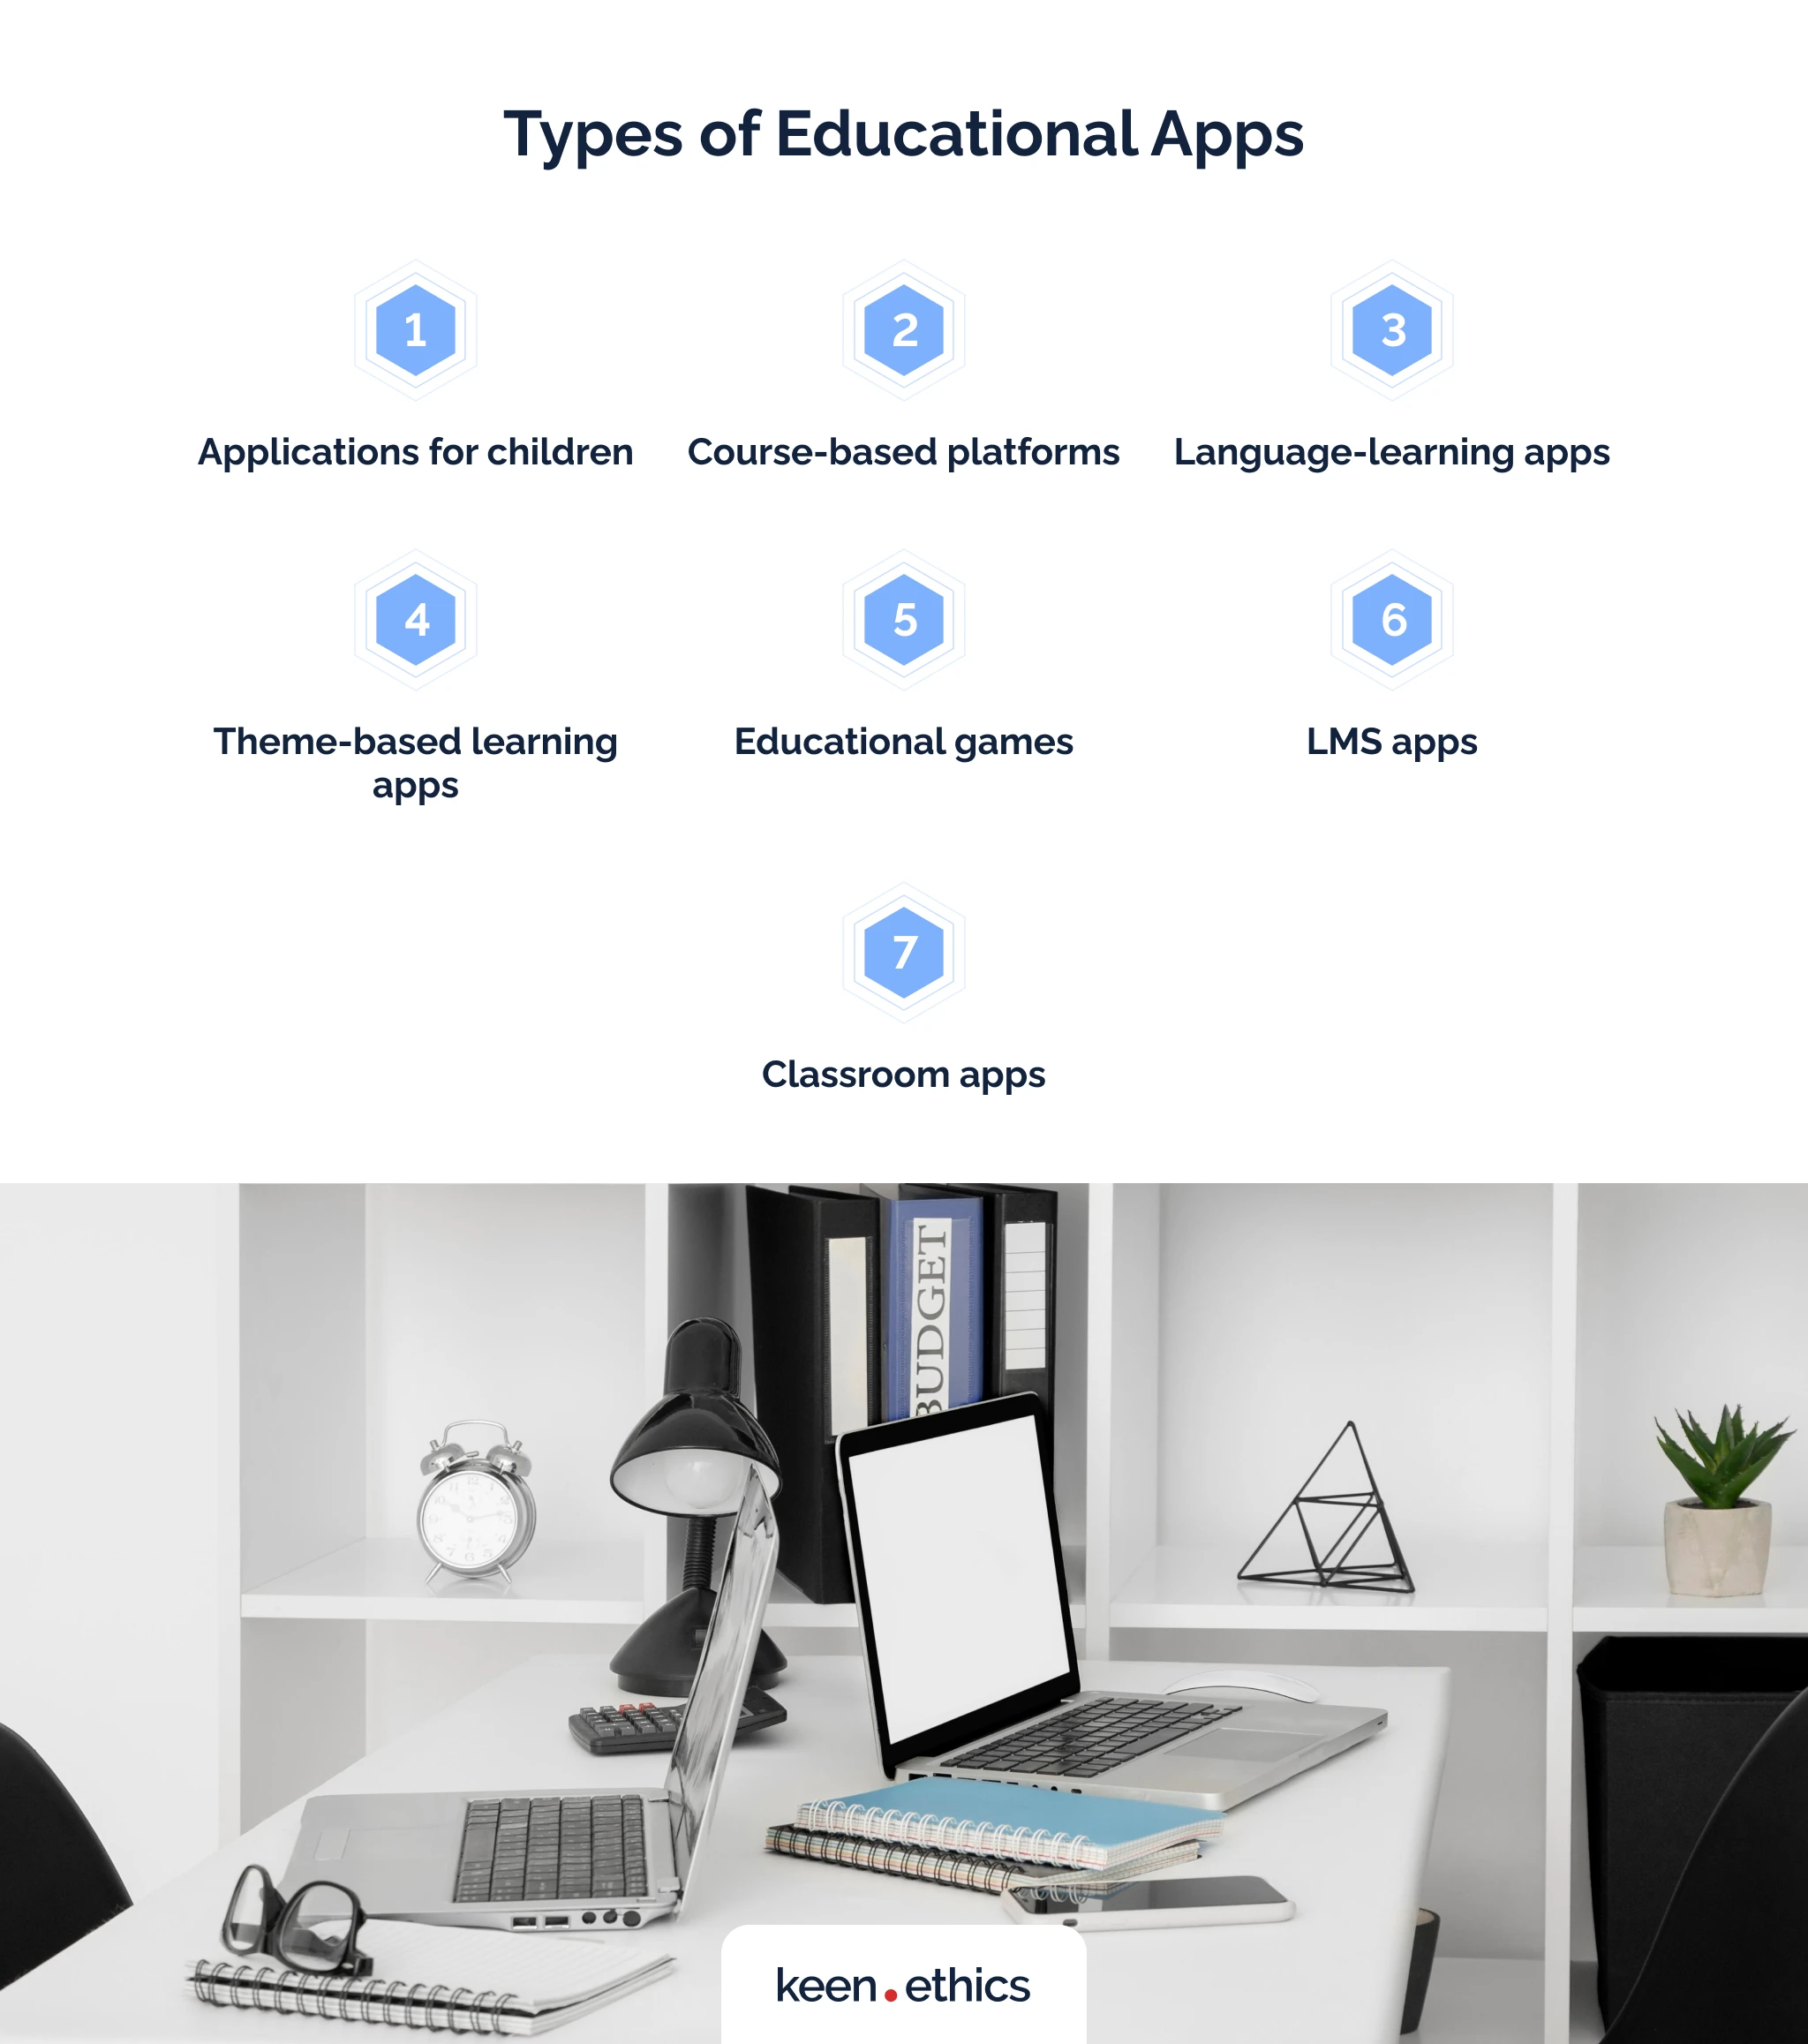 Types of educational apps